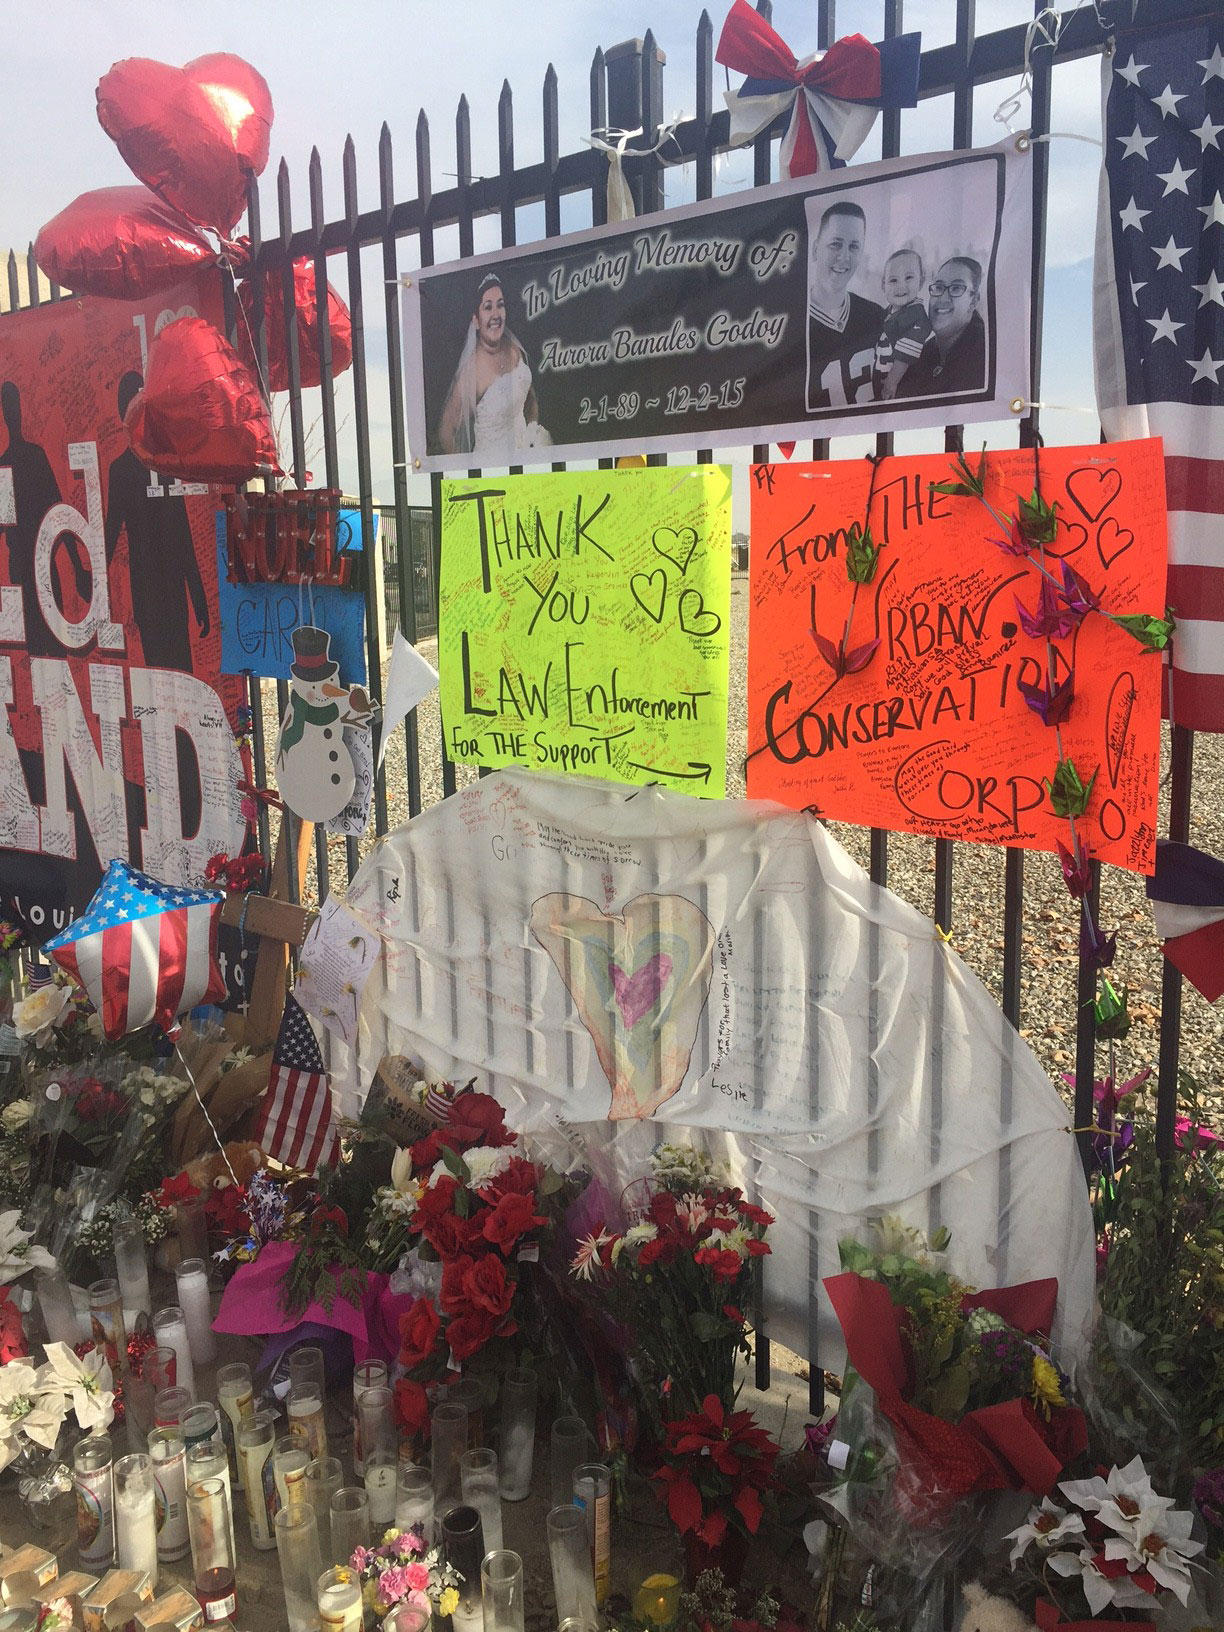 A makeshift memorial site showing photos of the victims, balloons and flowers